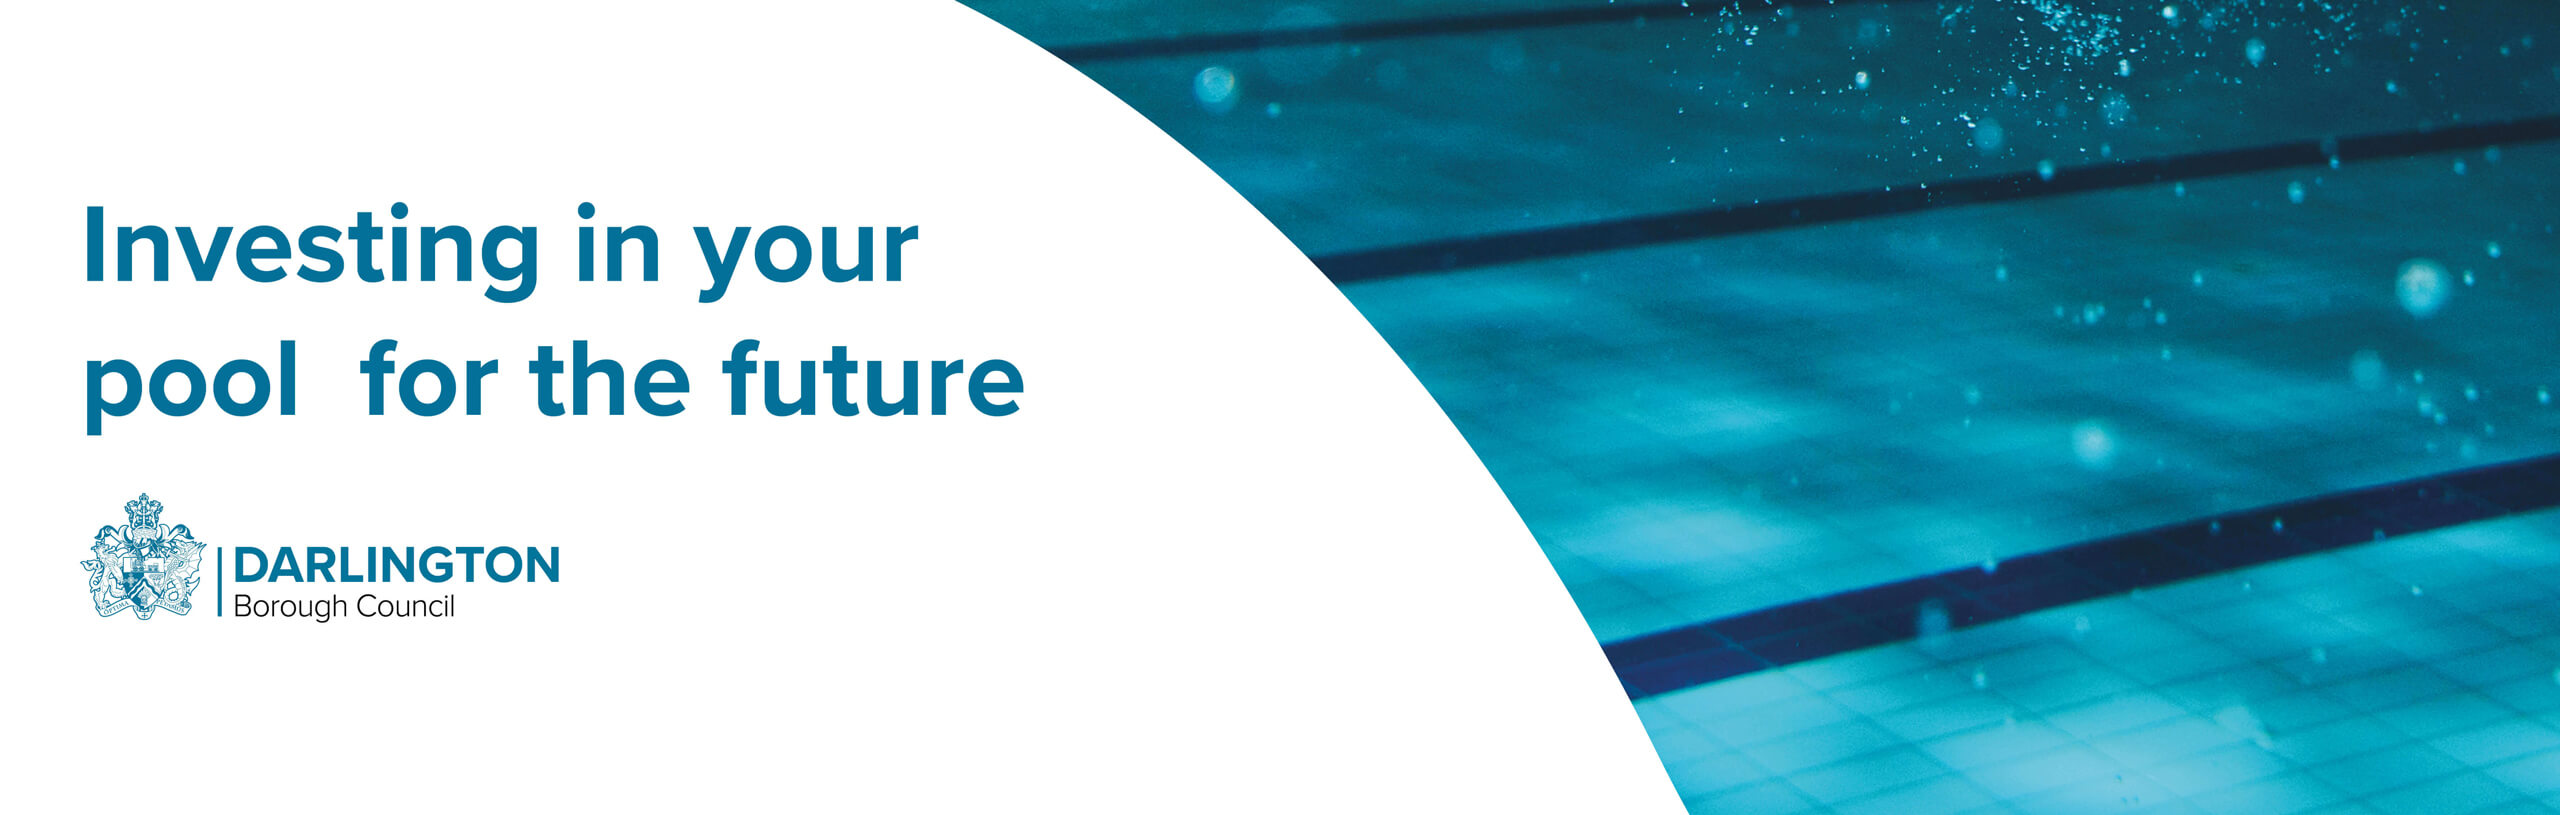 Investing in your pool for the future